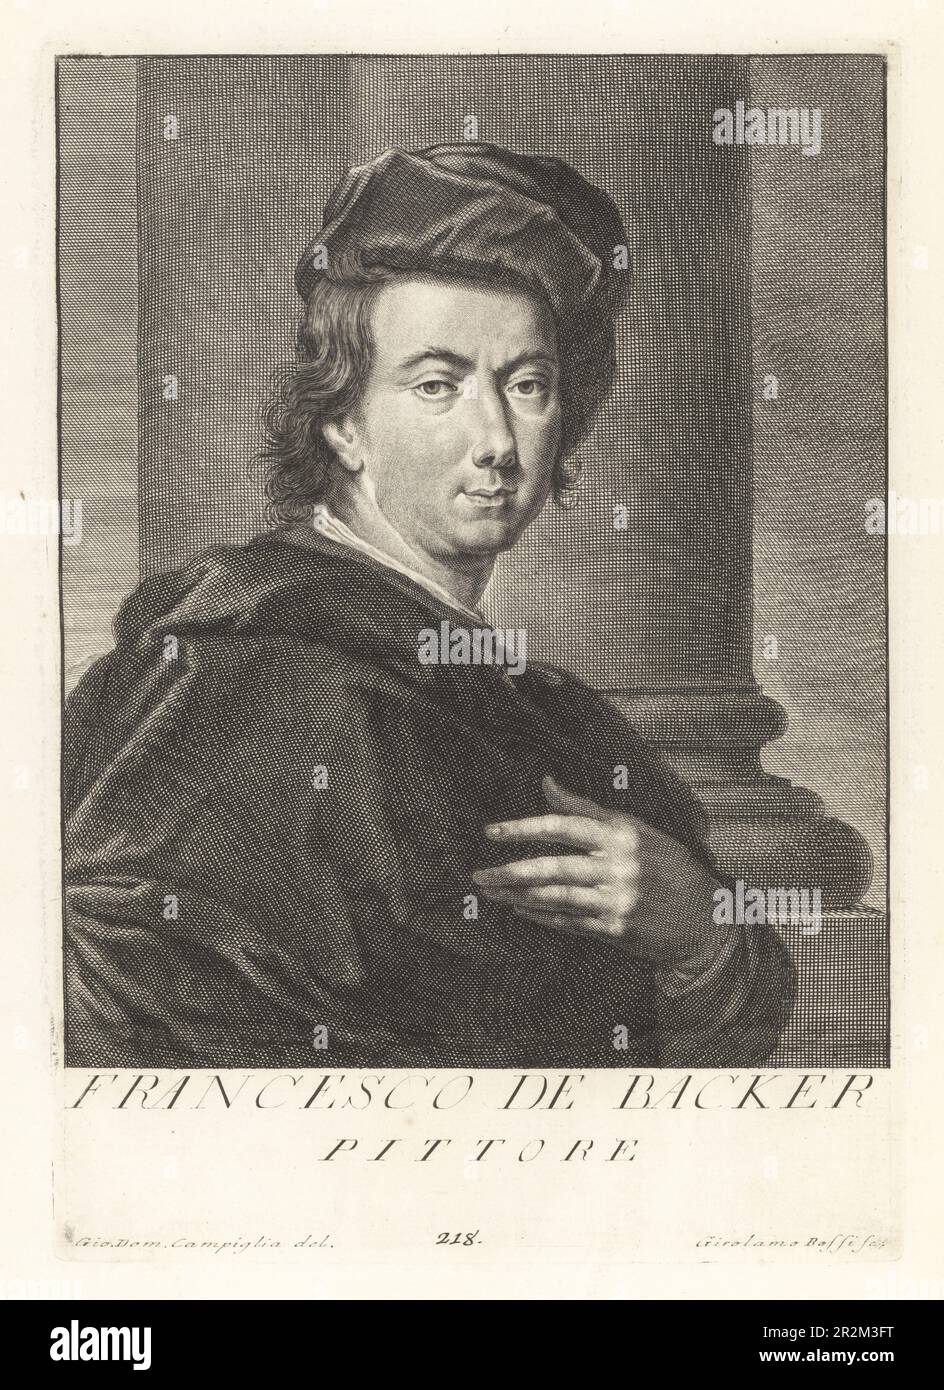 Franz de Backer, Flemish painter and graphic artist, representative of the post-Rubensian Flemish Baroque, c.1680-1750. Court painter to Elector Palatine Johann Wilhelm II and later Cosimo III de' Medici. Francesco de Backer, Pittore. Copperplate engraving by Girolamo Rossi after Giovanni Domenico Campiglia after a self portrait by the artist from Francesco Moucke's Museo Florentino (Museum Florentinum), Serie di Ritratti de Pittori (Series of Portraits of Painters) stamperia Mouckiana, Florence, 1752-62. Stock Photo